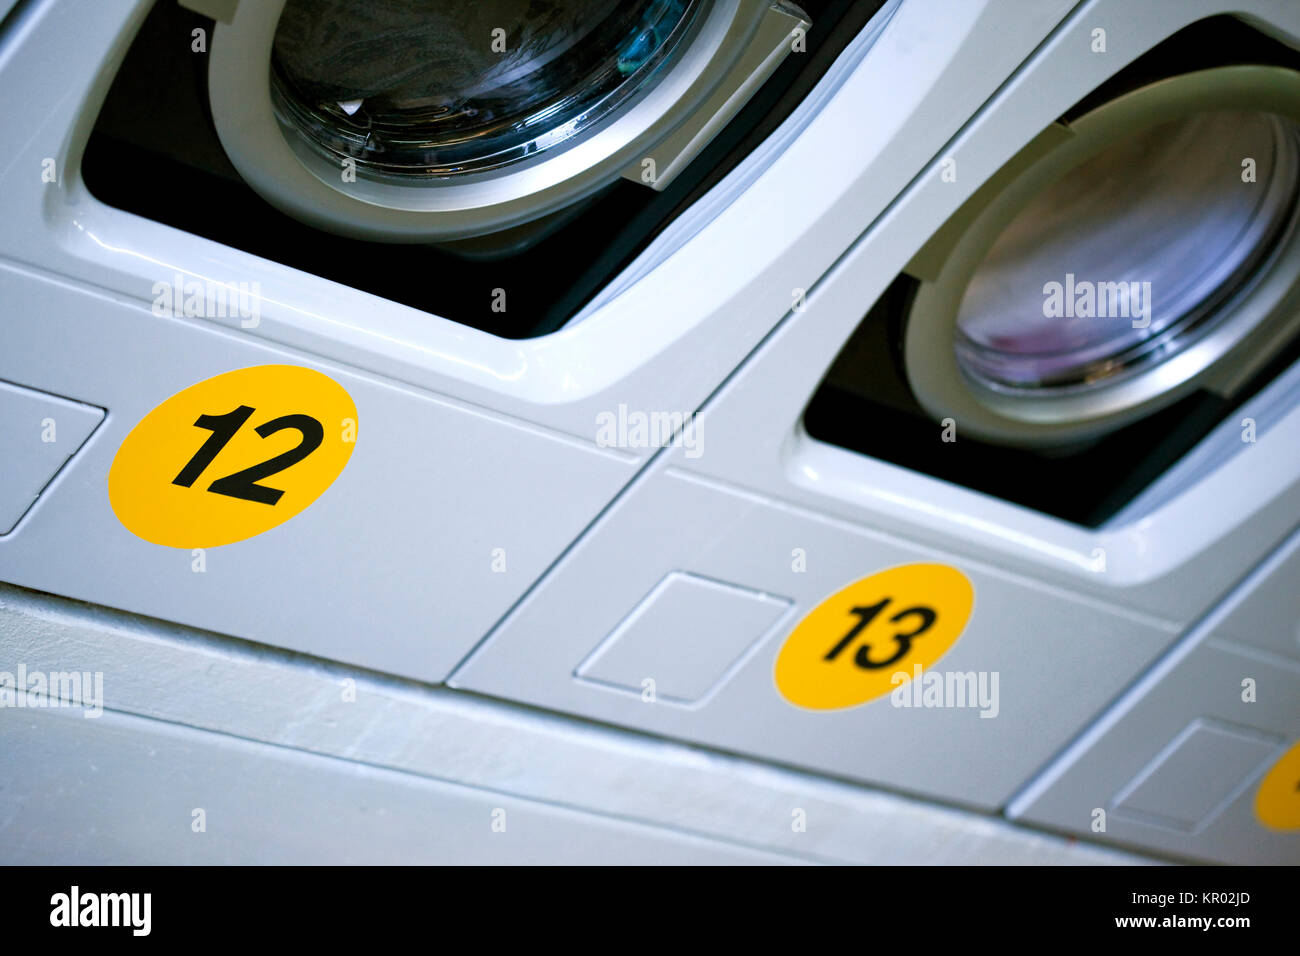 Washing machines in a pressing Stock Photo